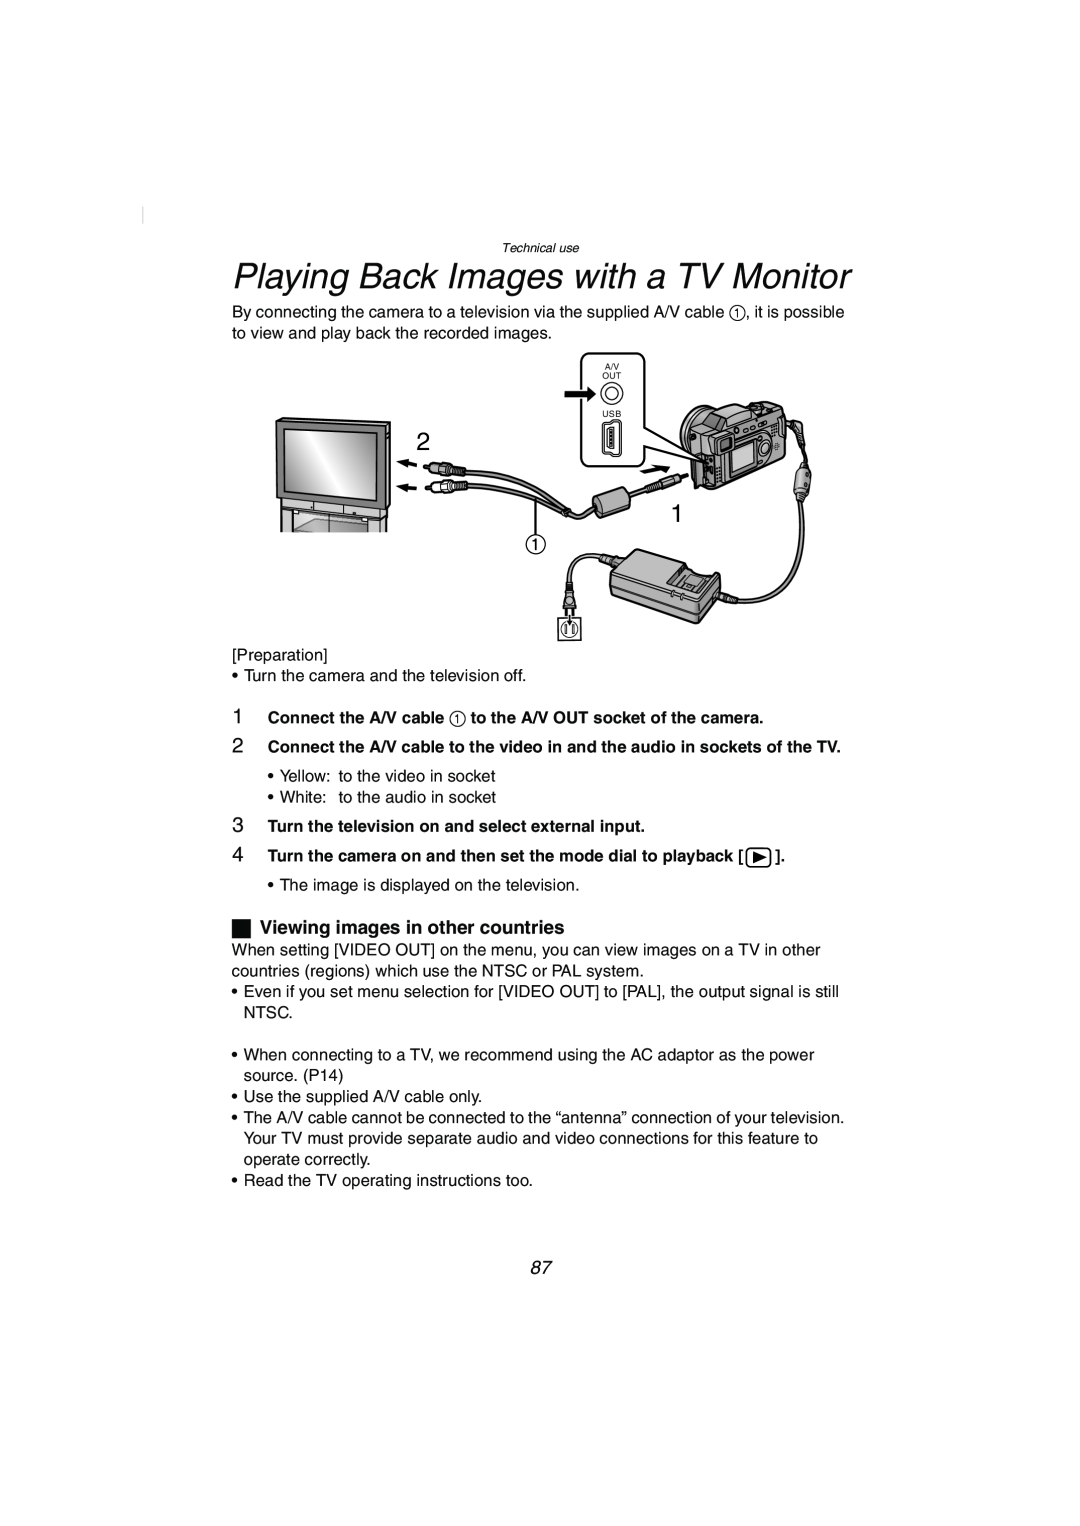 Panasonic DMC-FZ2PP operating instructions Playing Back Images with a TV Monitor, ª Viewing images in other countries 